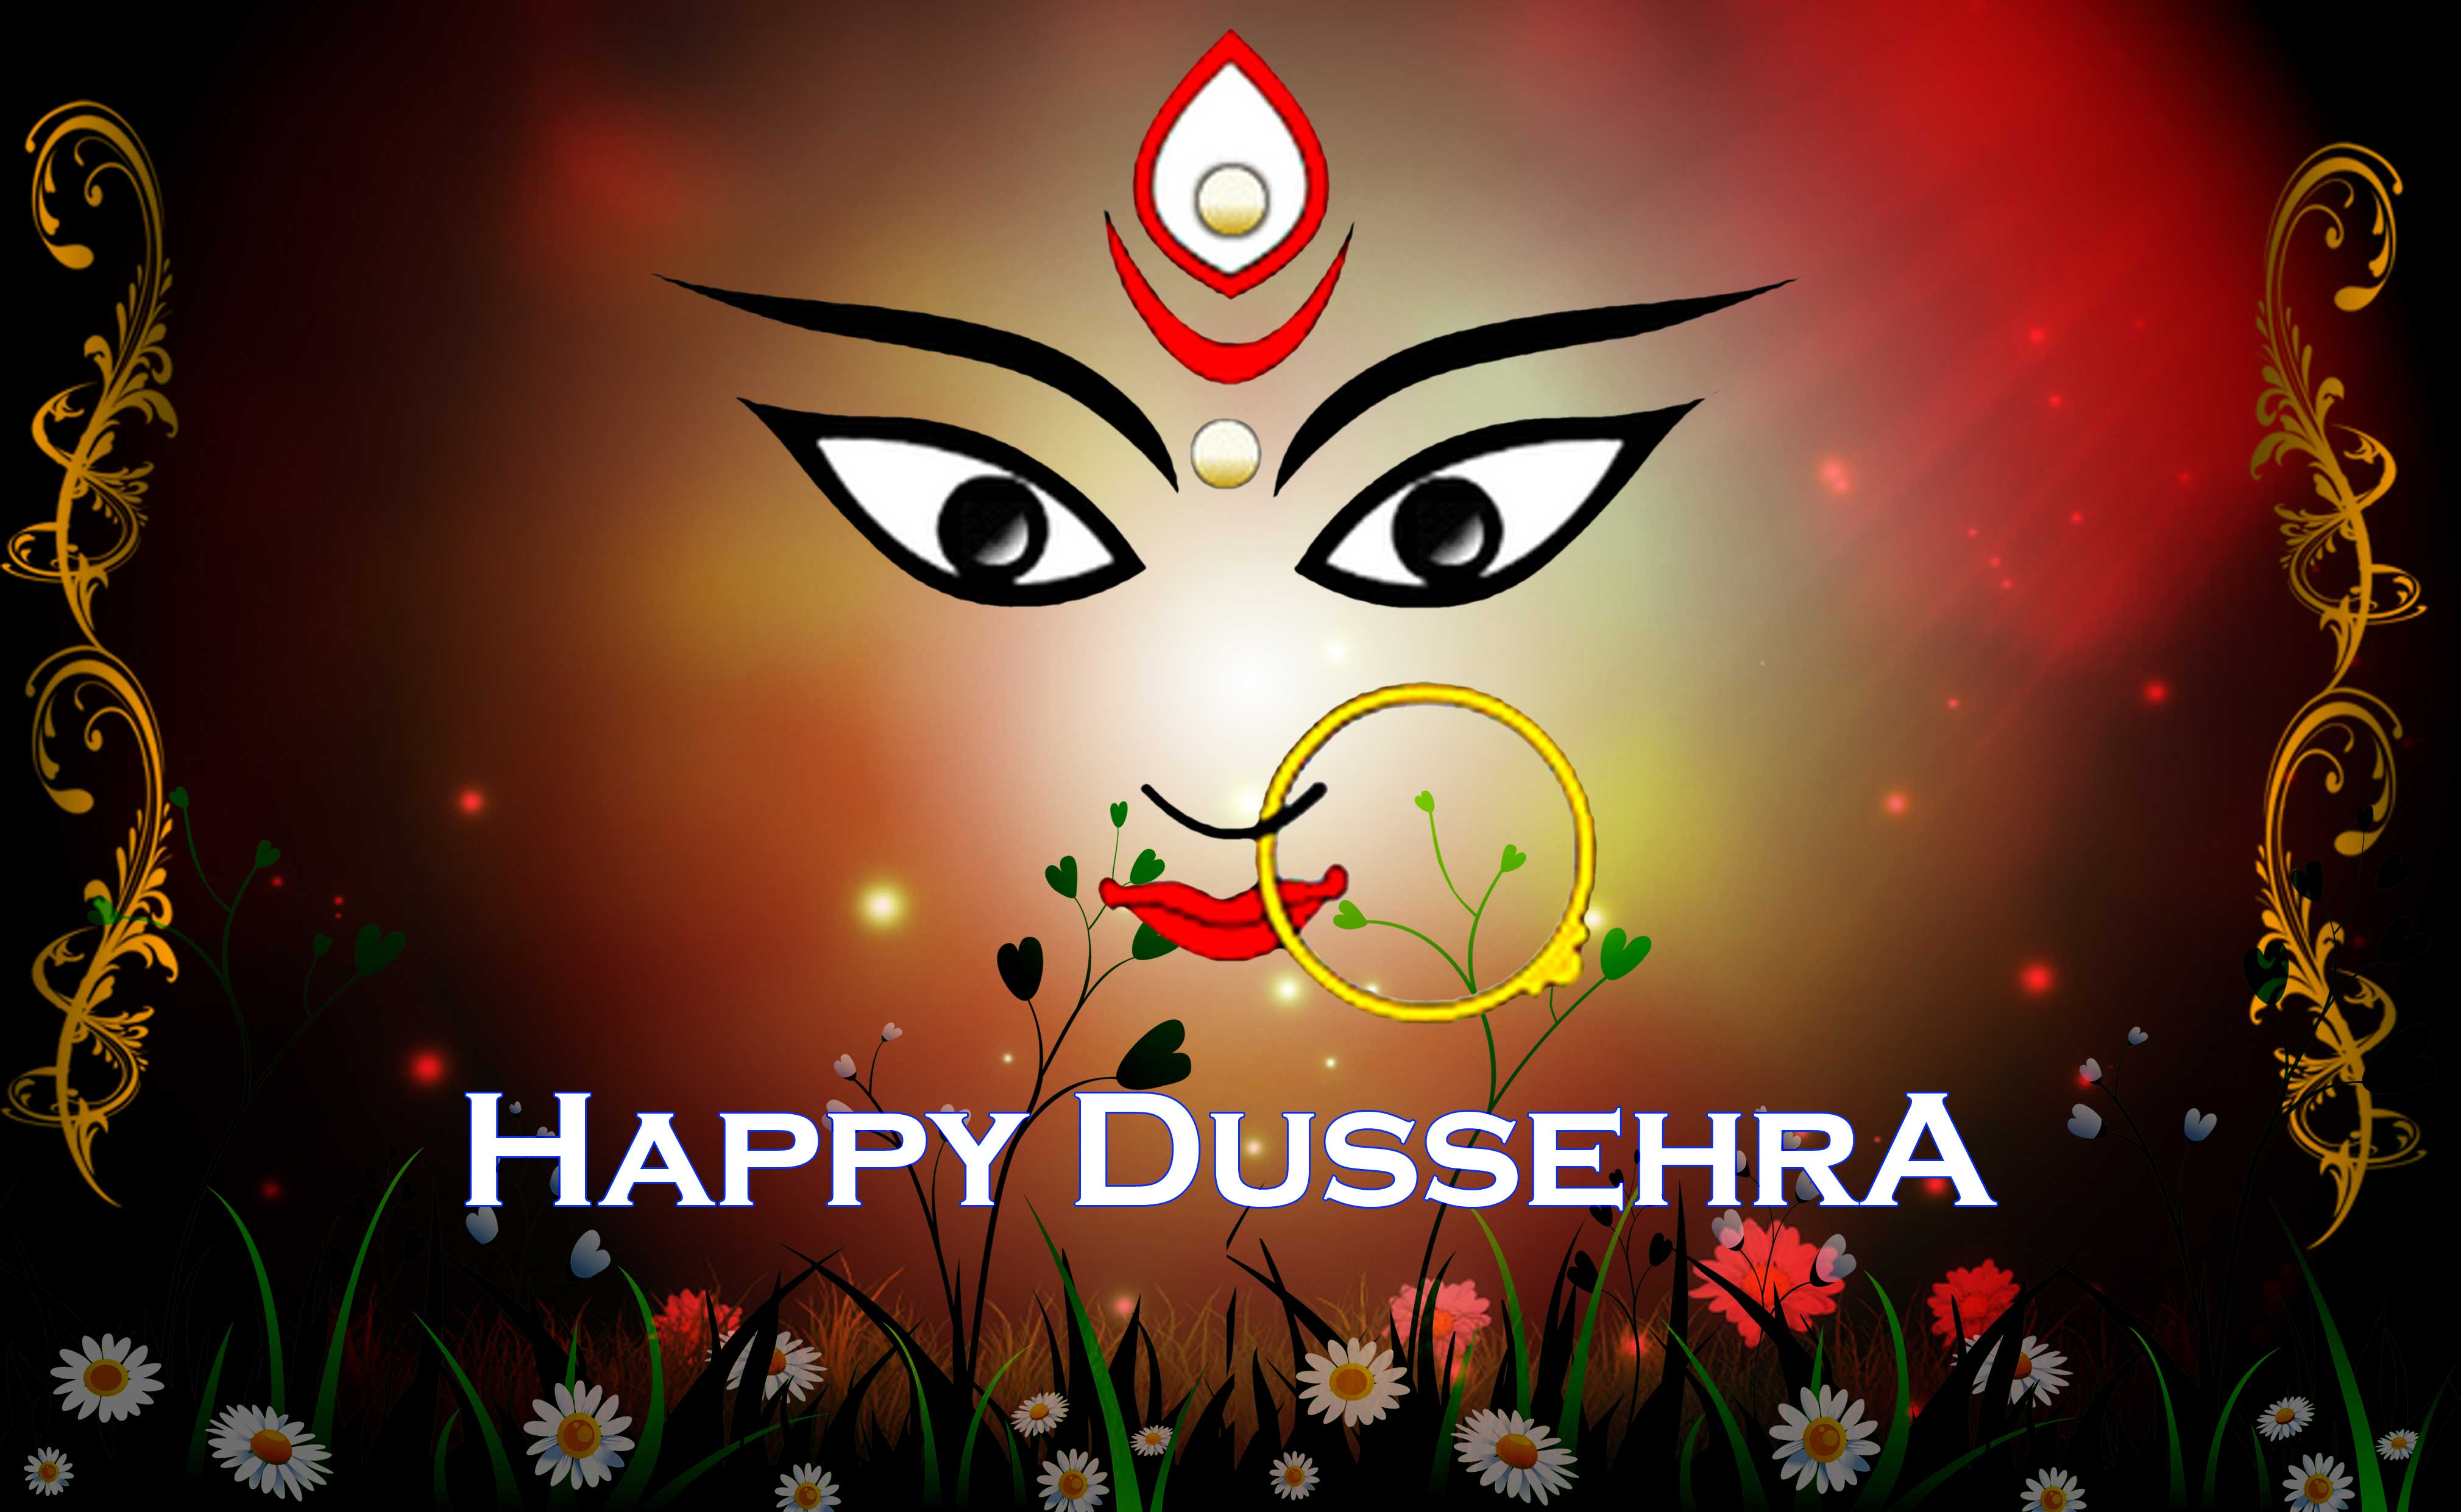 Awesome Happy Dussehra Image, Wallpaper \u0026 GIF